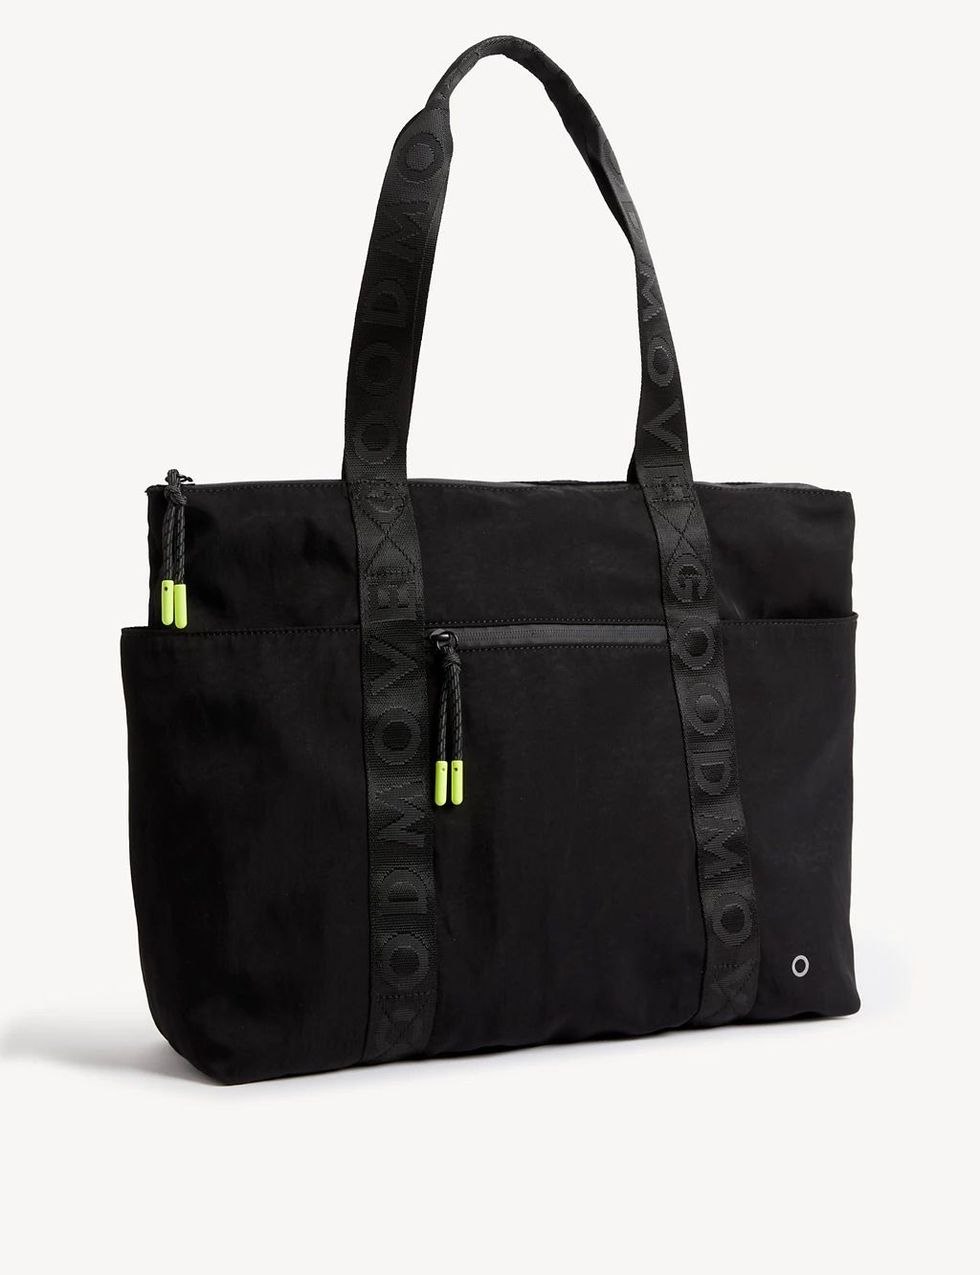 Designer Gym Tote Bag for Women by MB Krauss Review